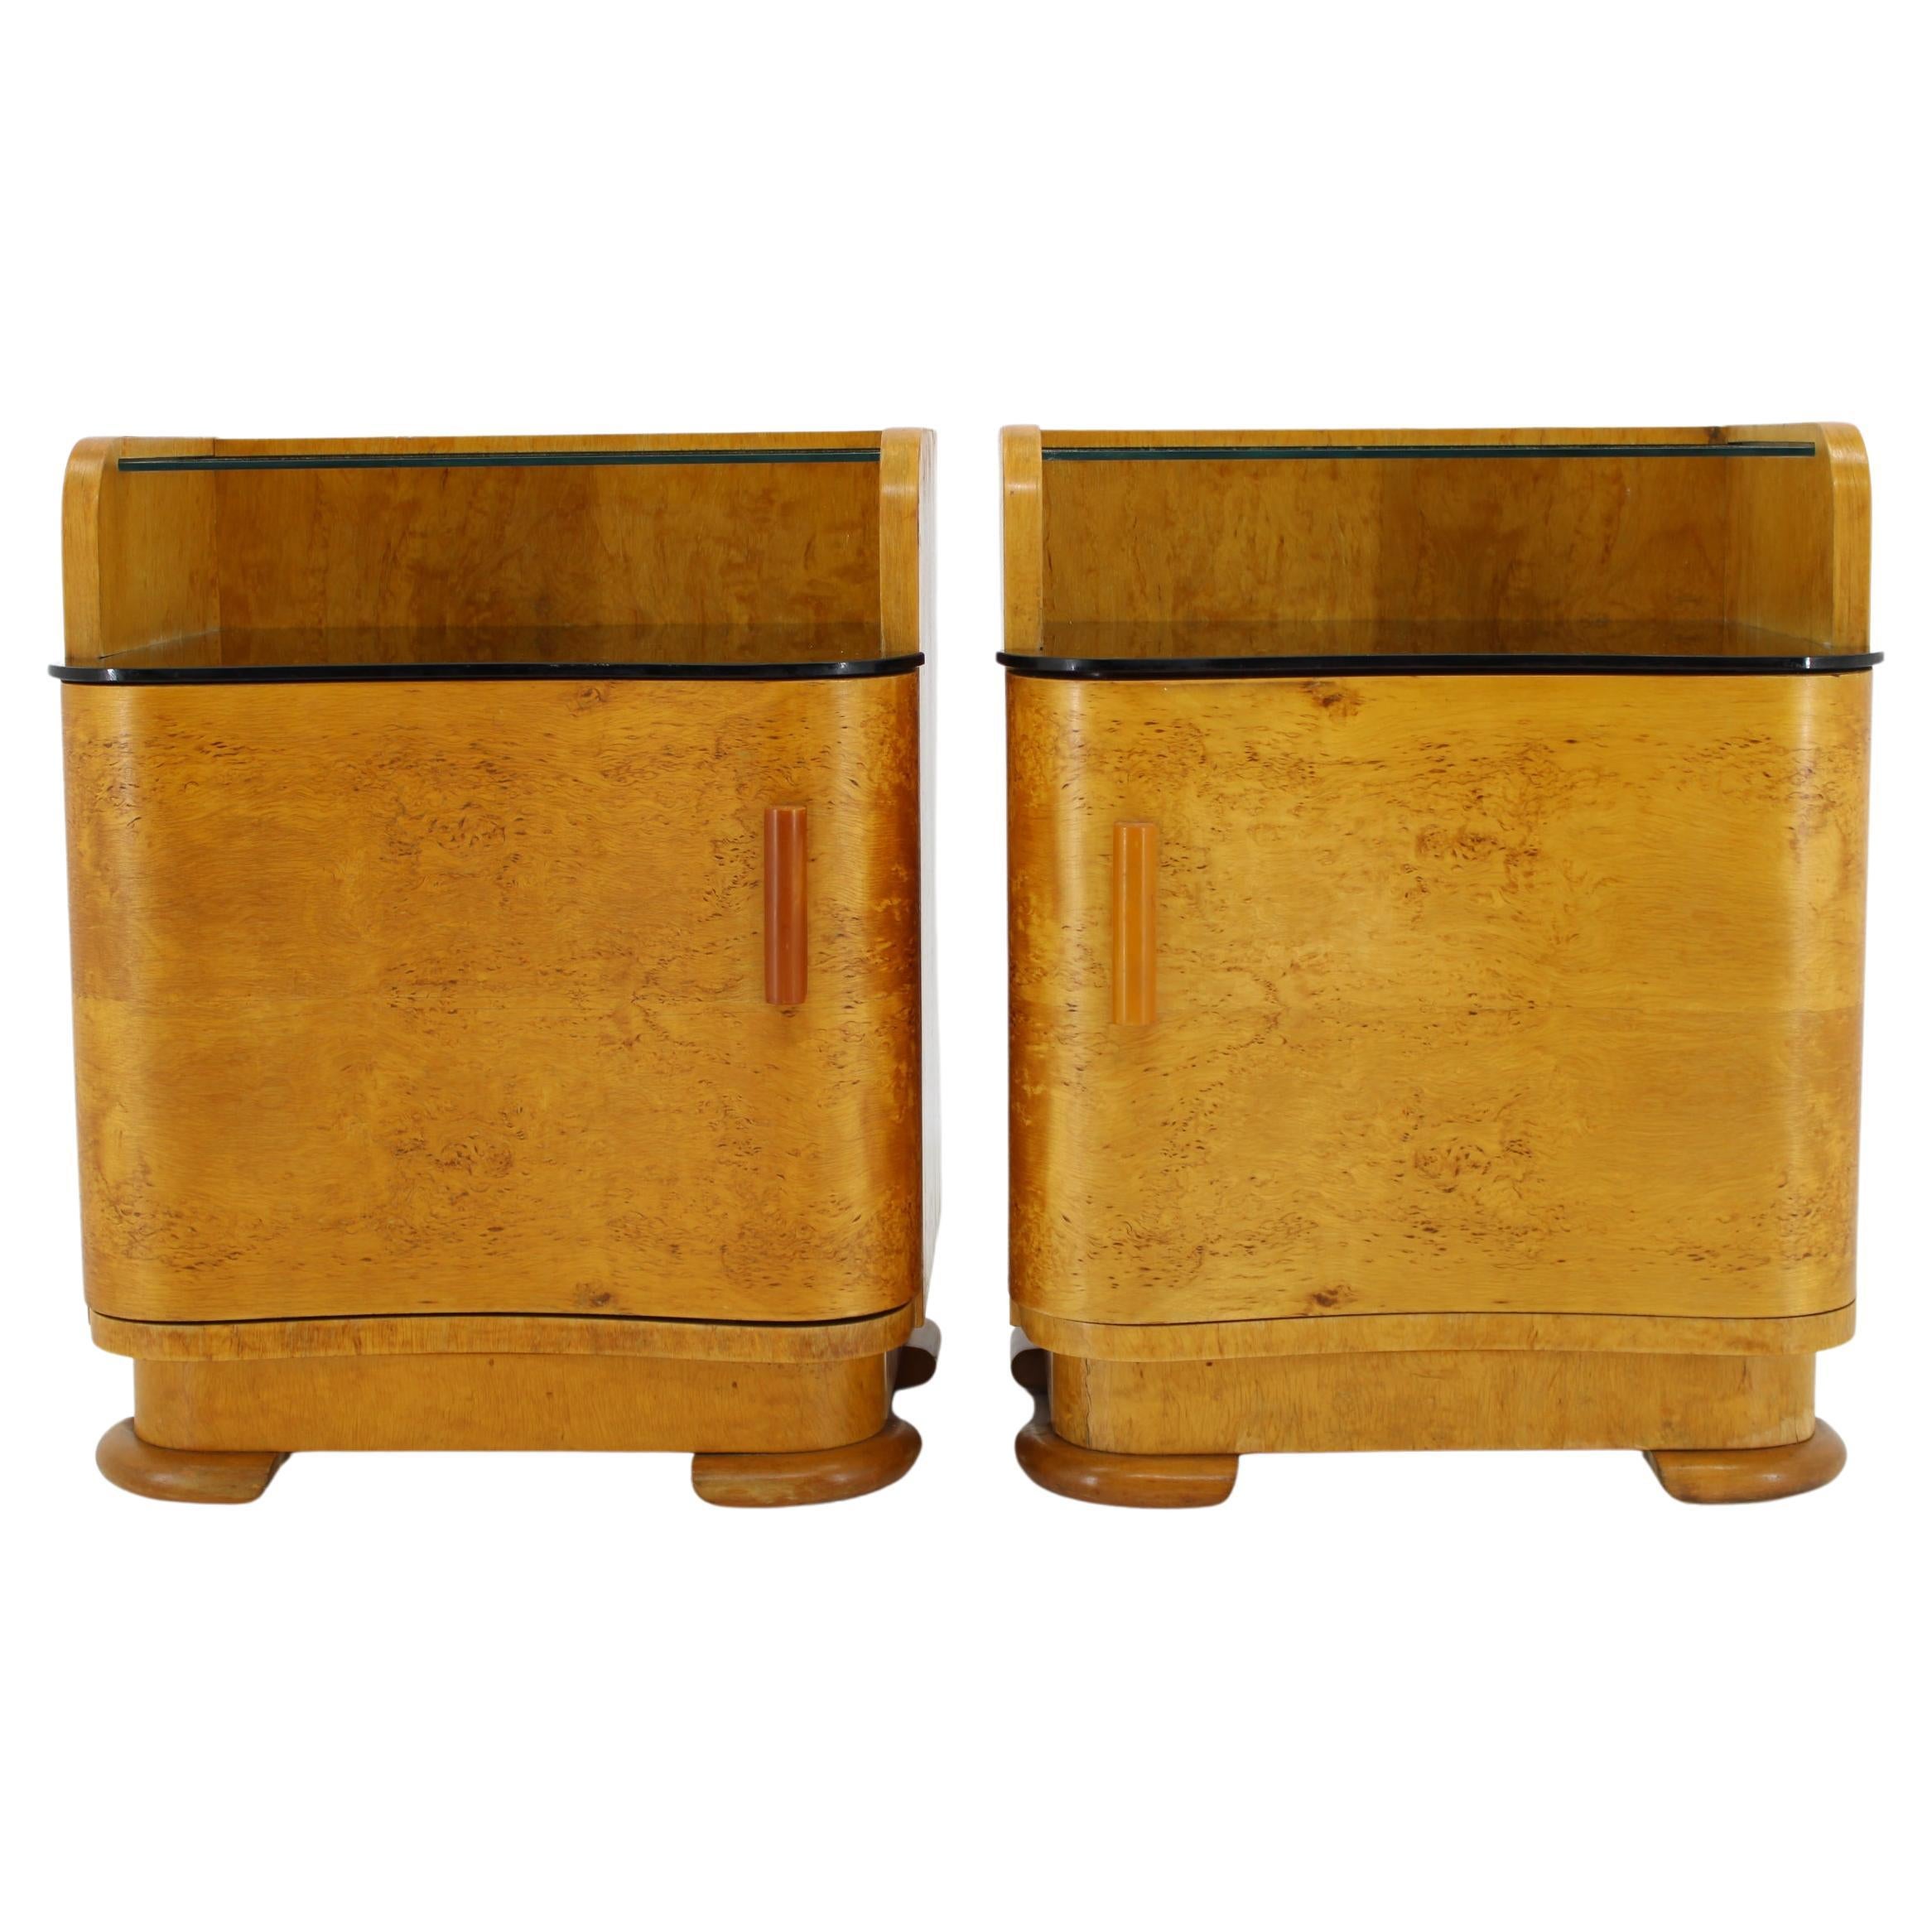 1950s Pair of Bedside Tables in Maple Finish, Czechoslovakia